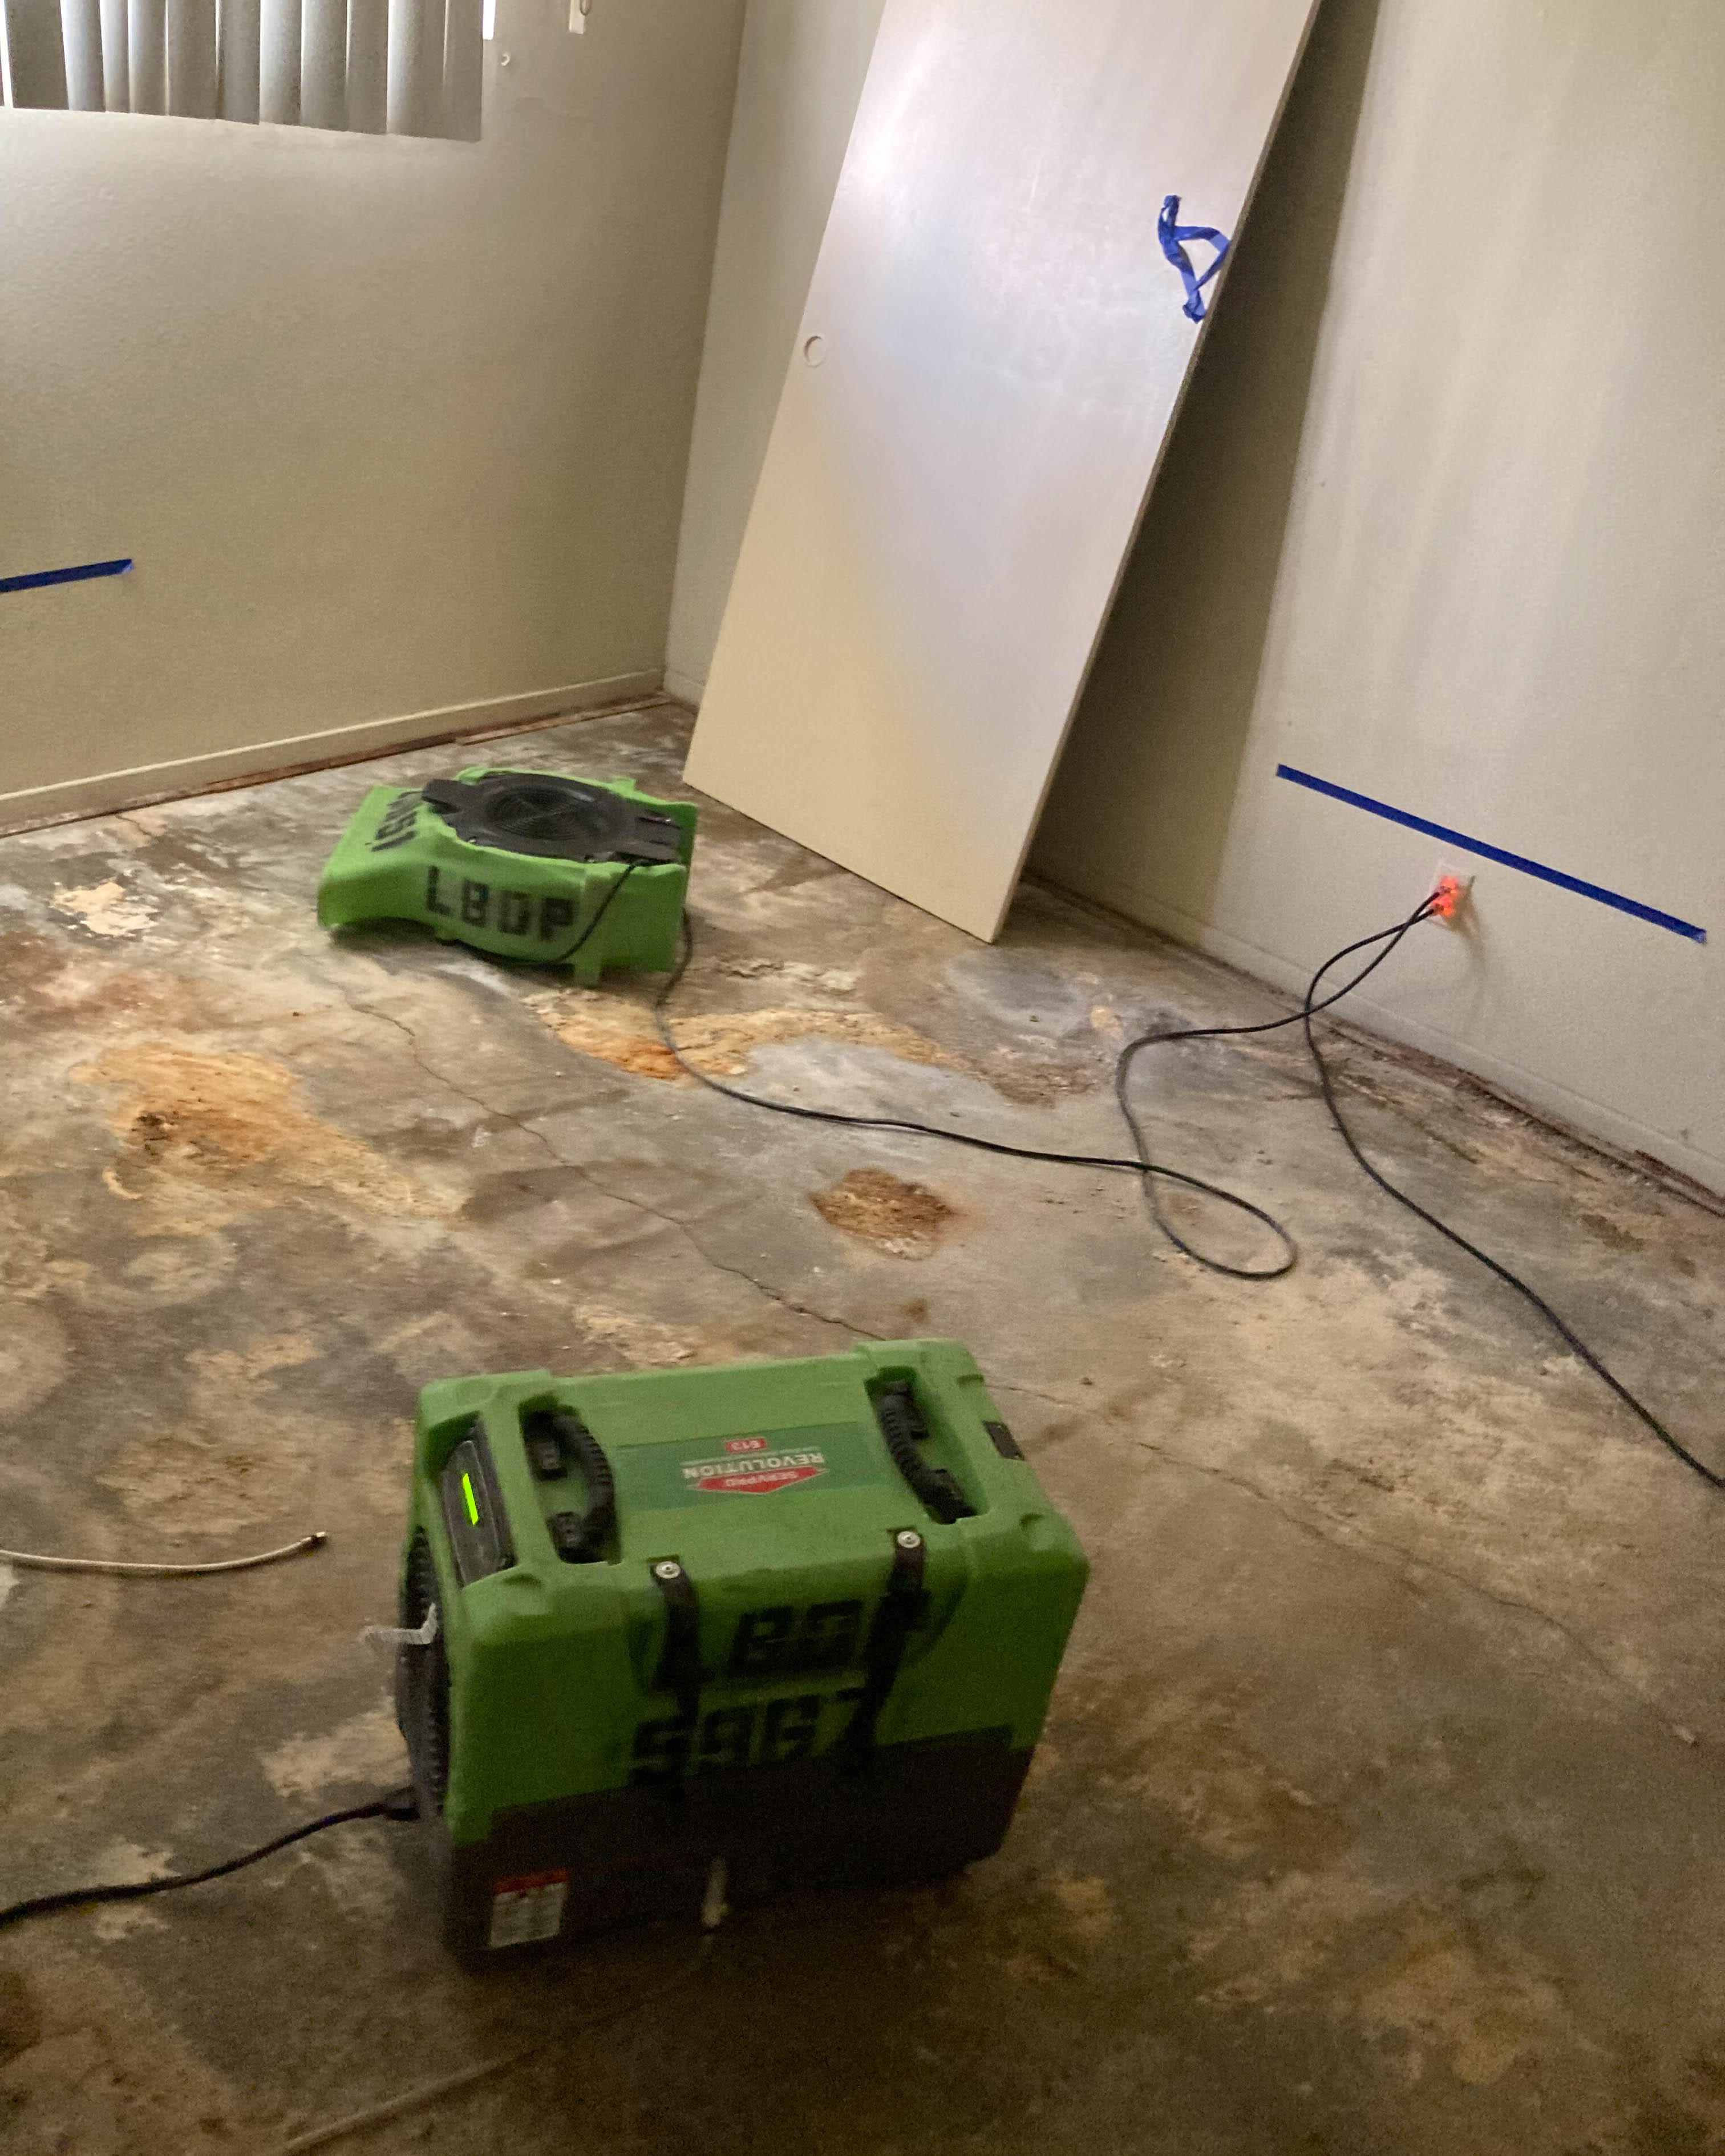 Servpro of Costa Mesa is available 24 hours a day, 7 days a week to respond to water emergencies. We have trained technicians ready to handle any situation and provide quality service. Call us today!